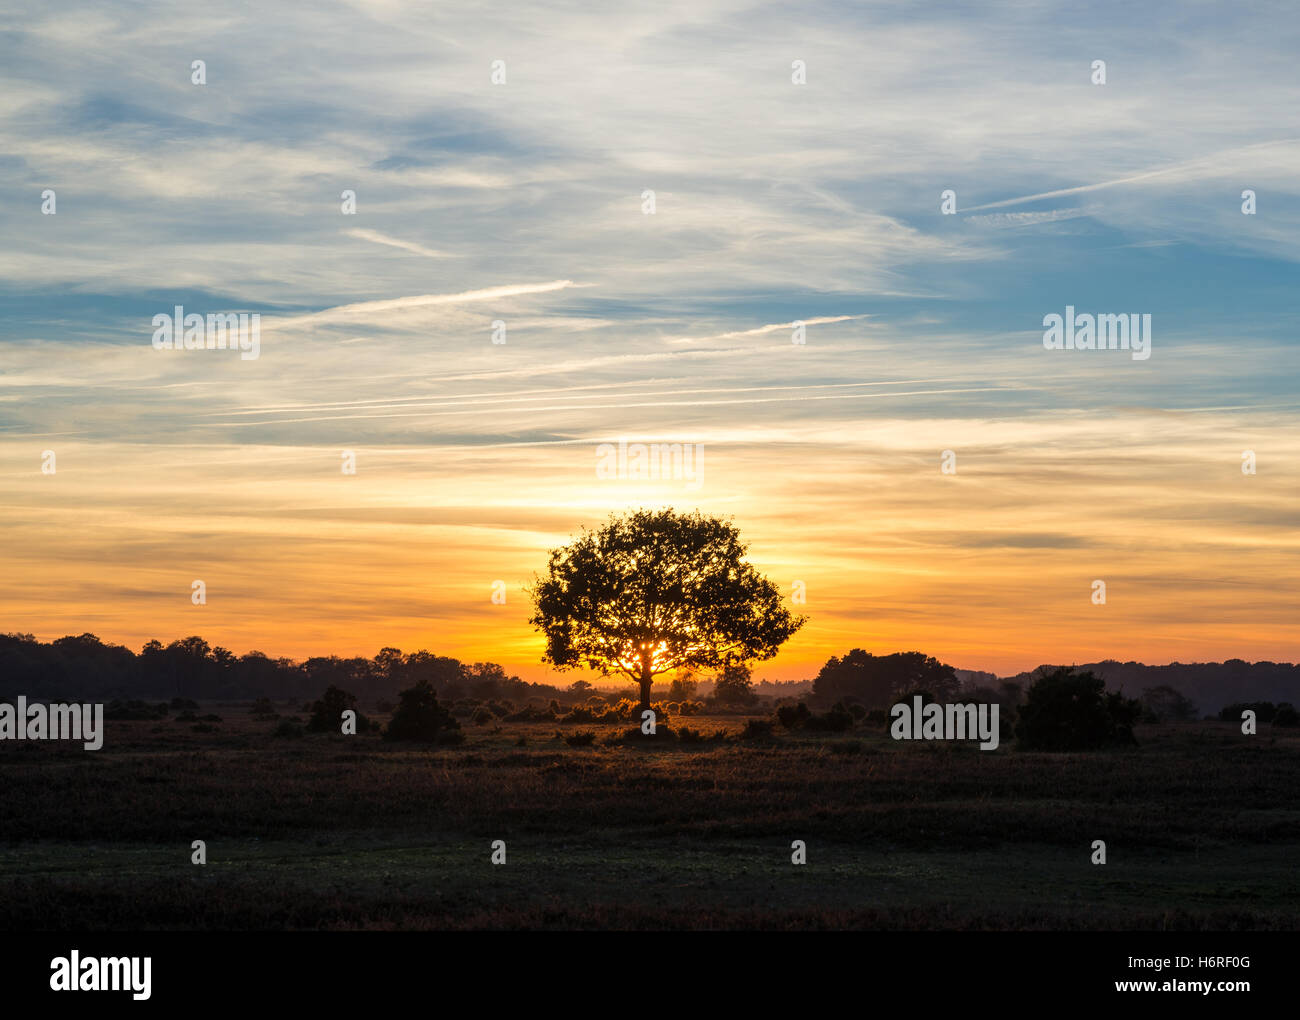 Solitary small round tree silhouette, glowing orange sunset and blue evening sky. Stock Photo